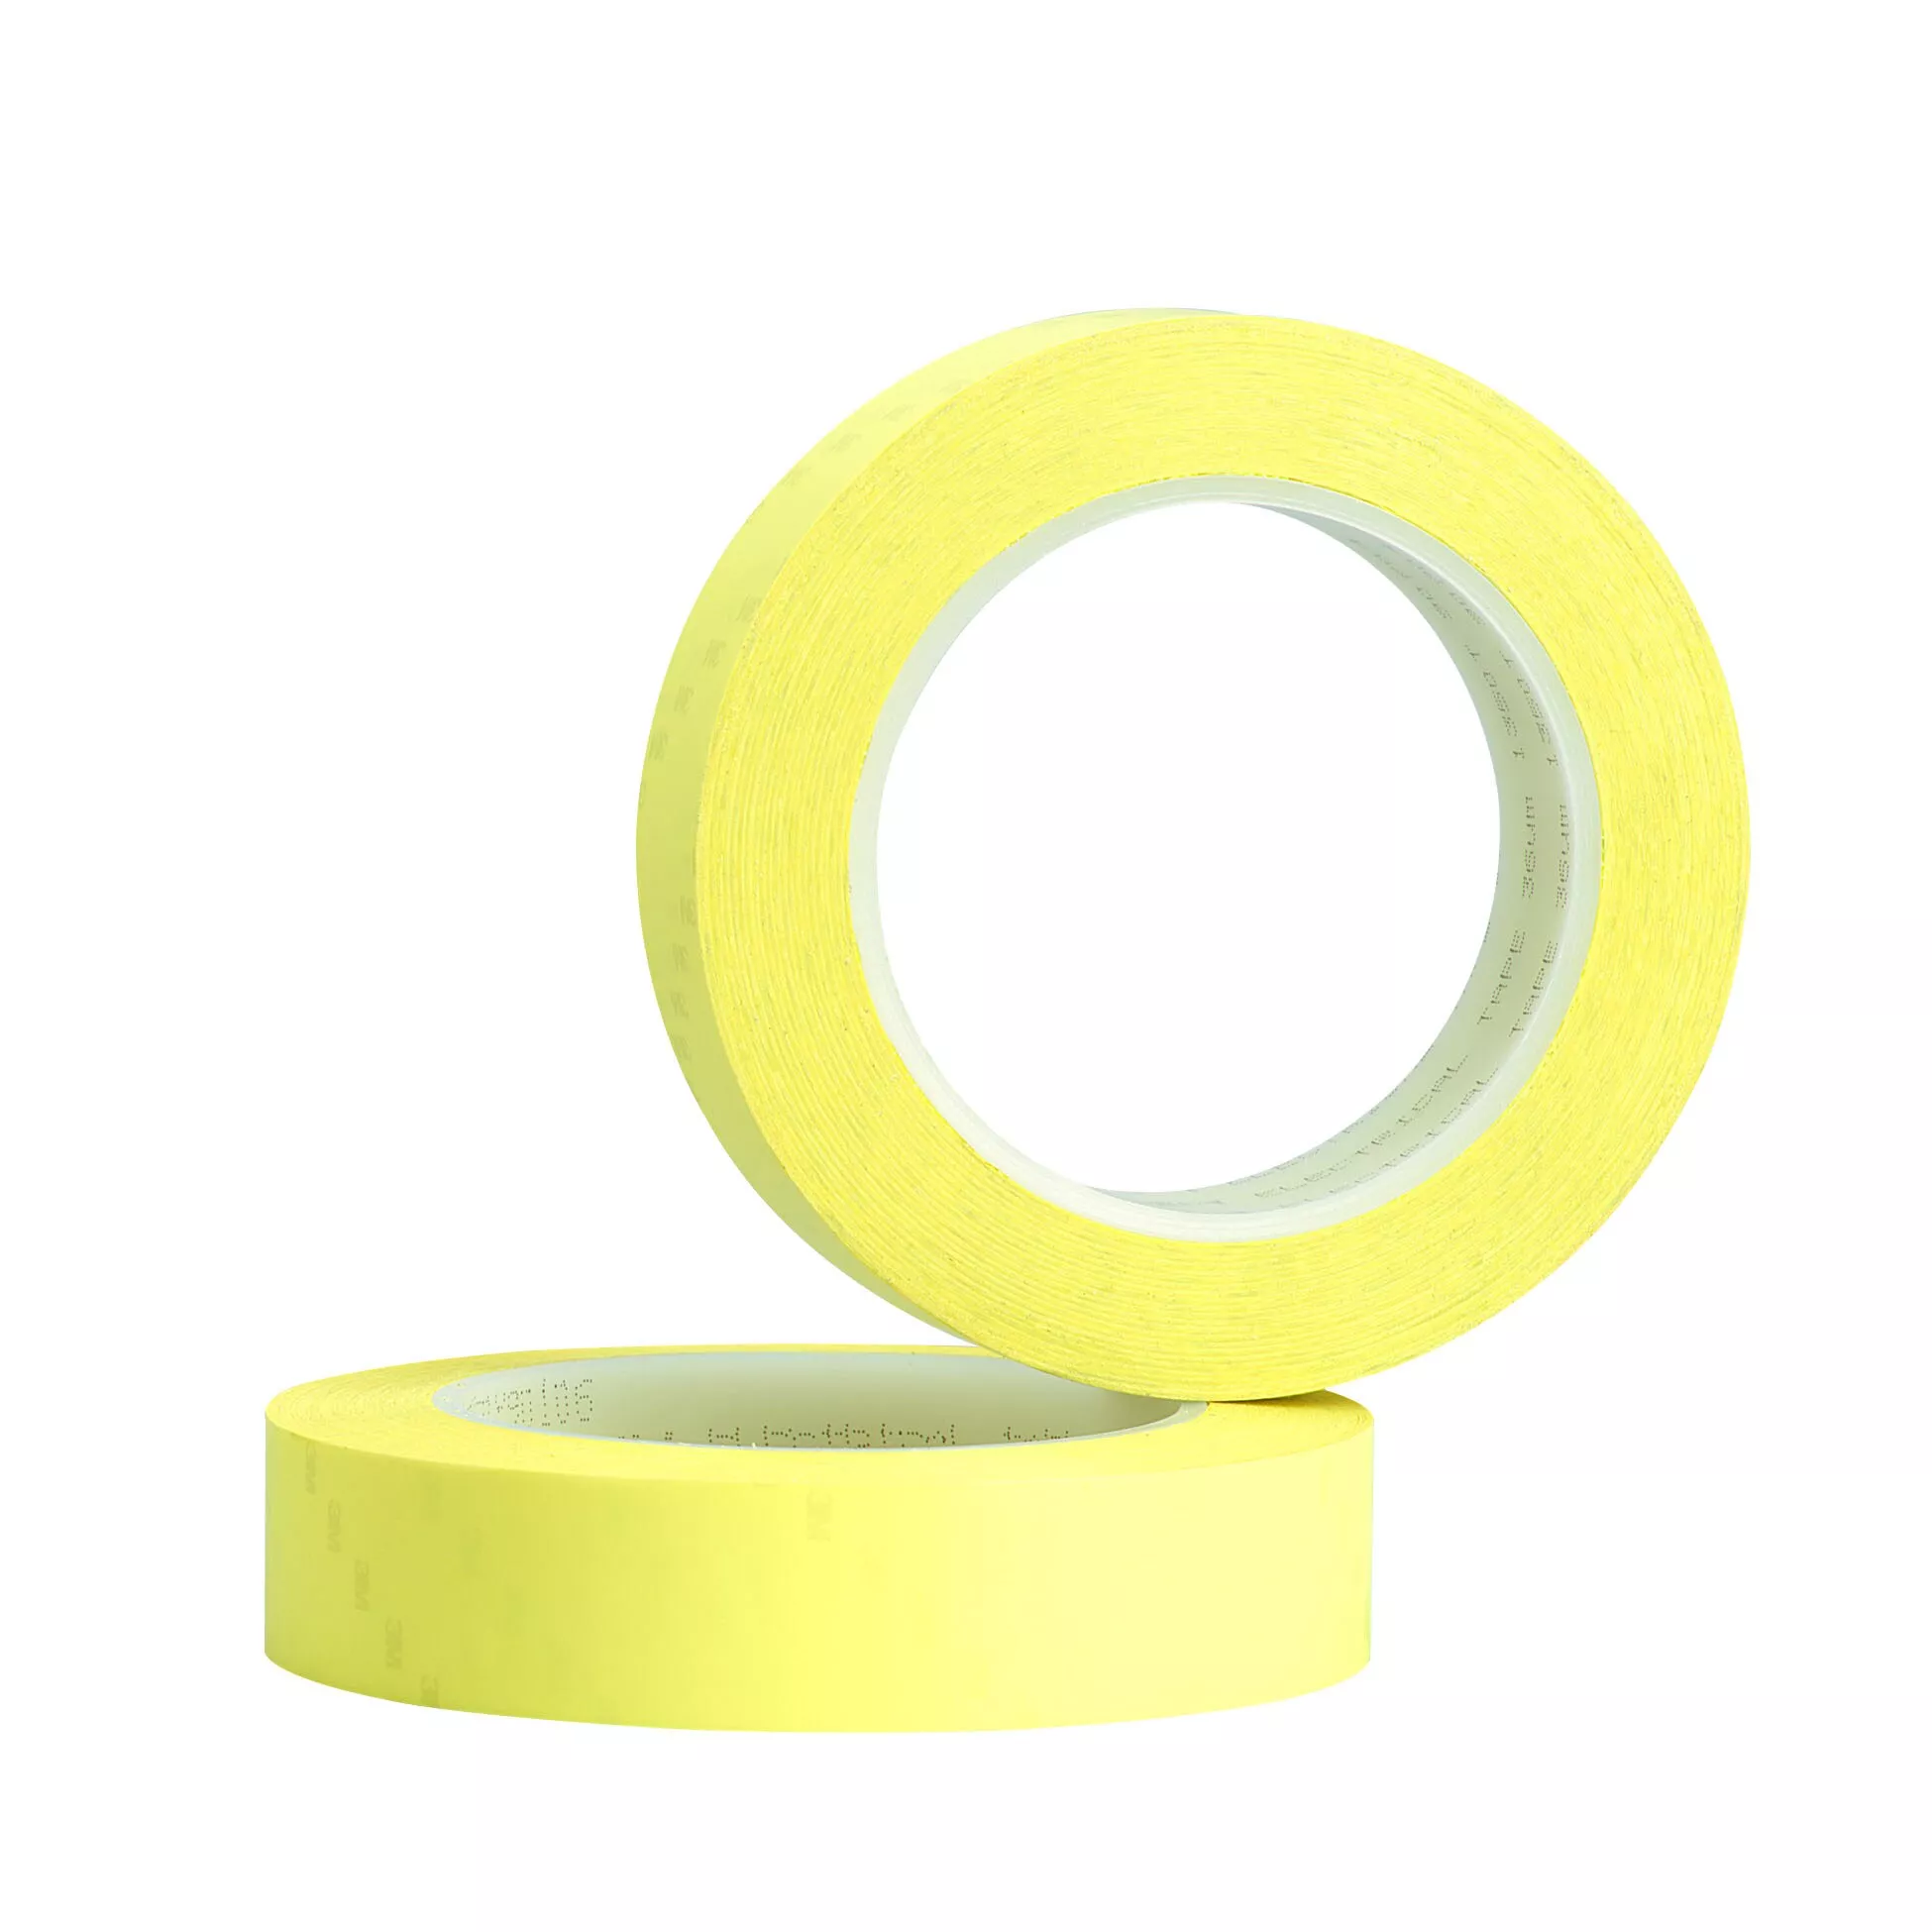 SKU 7010045305 | 3M™ Polyester Film Electrical Tape 57